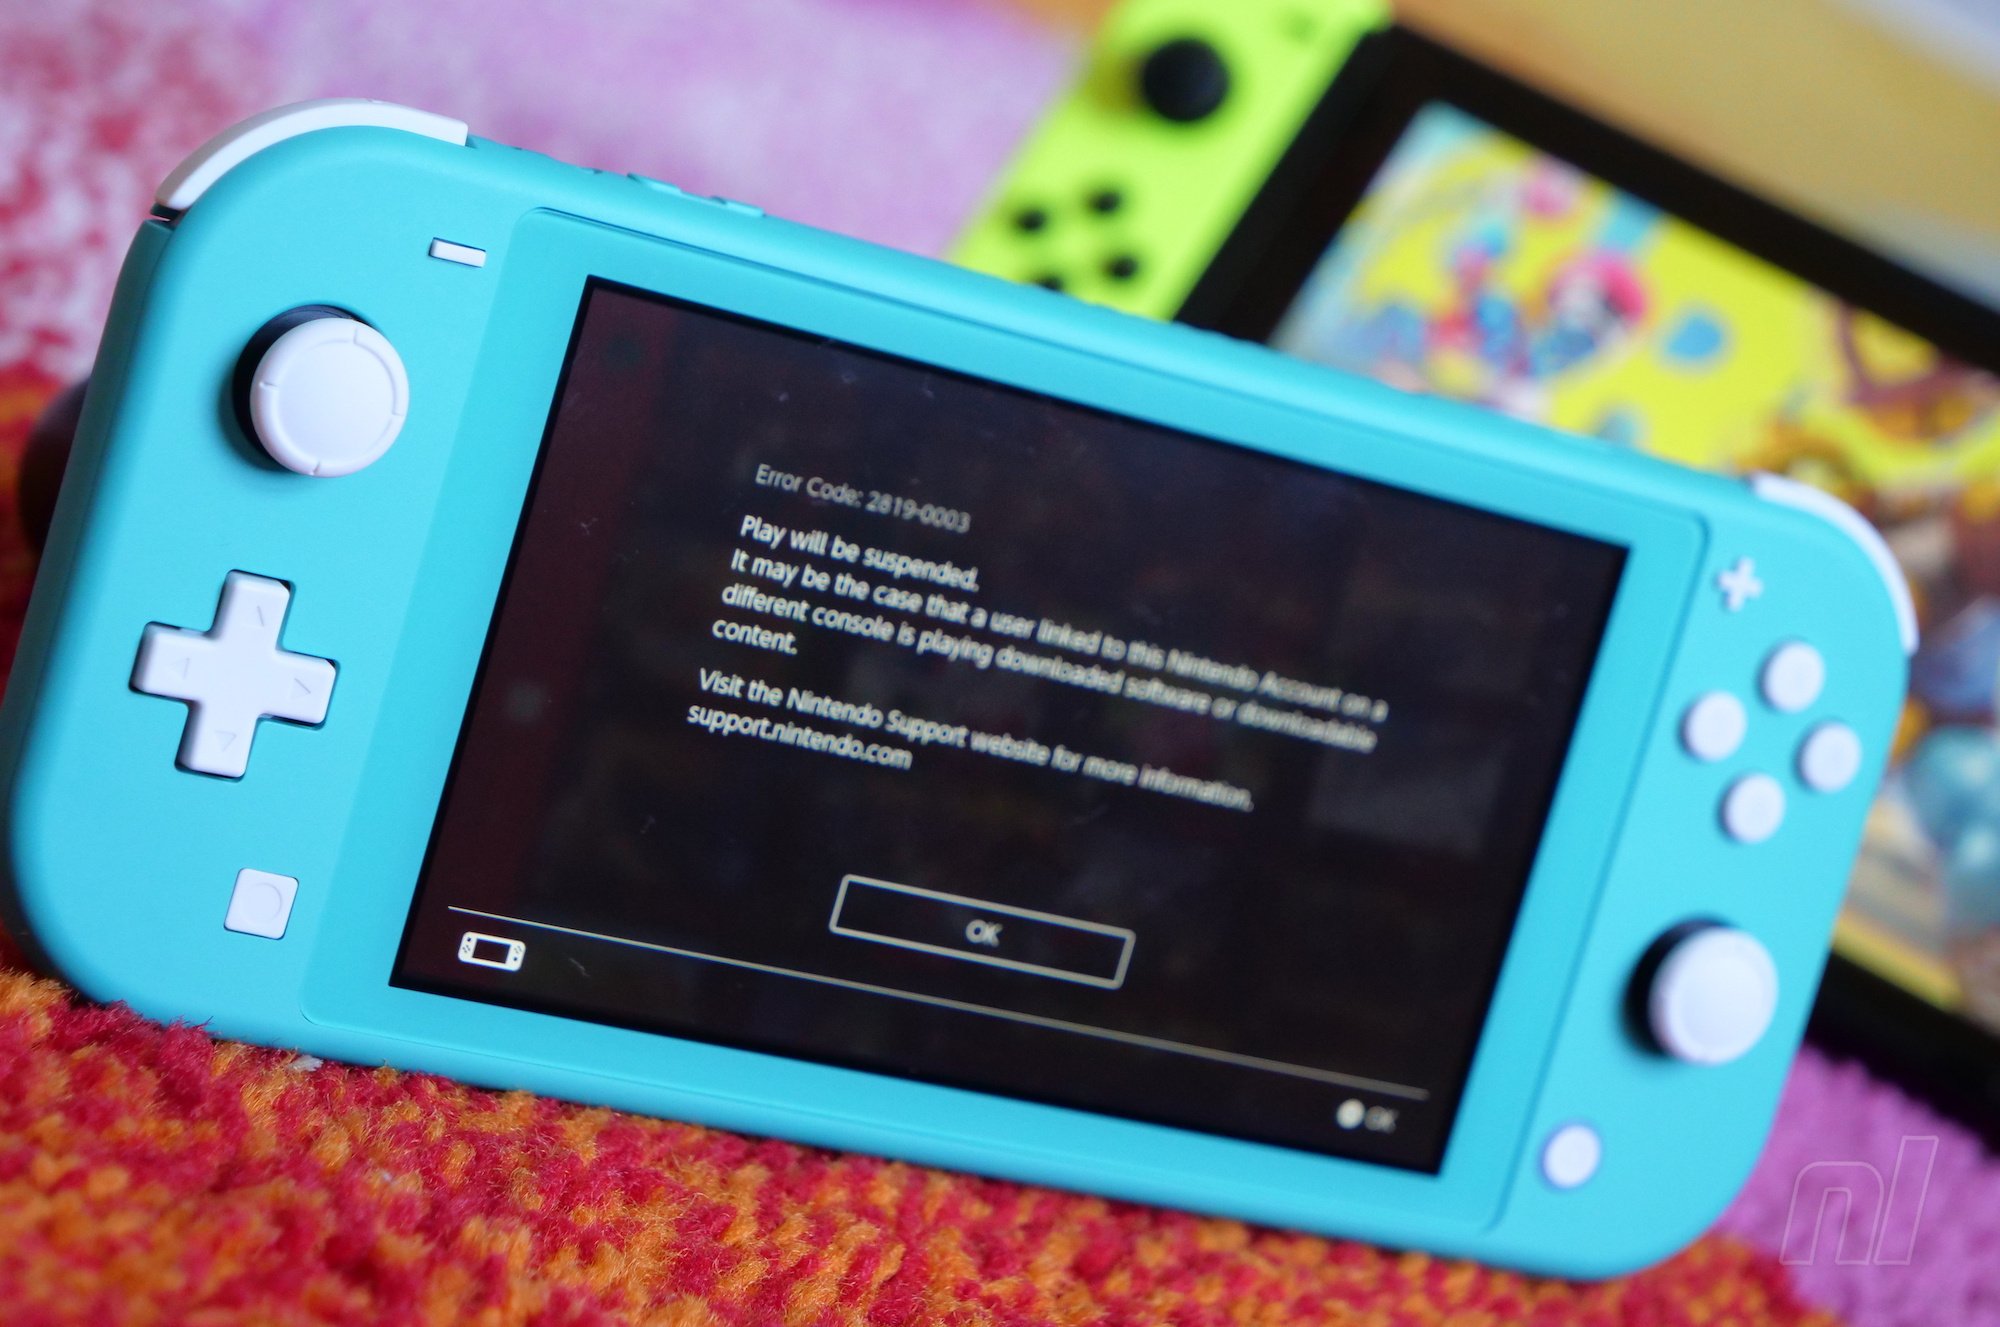 Sorry, But There's No Hidden Workaround To Connect Your Switch Lite To